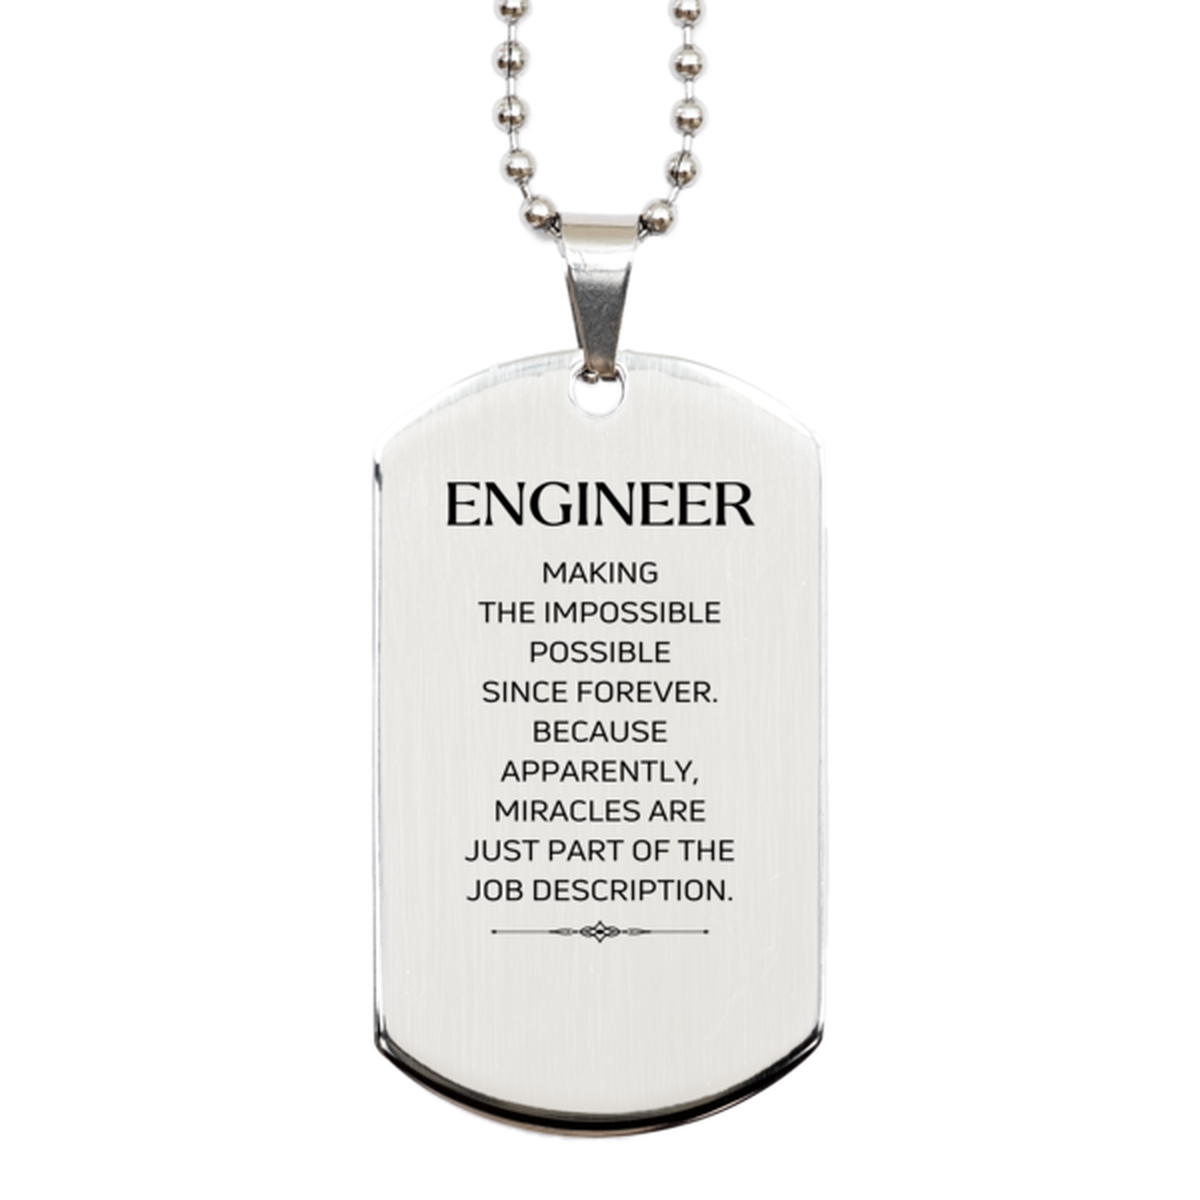 Funny Engineer Gifts, Miracles are just part of the job description, Inspirational Birthday Silver Dog Tag For Engineer, Men, Women, Coworkers, Friends, Boss